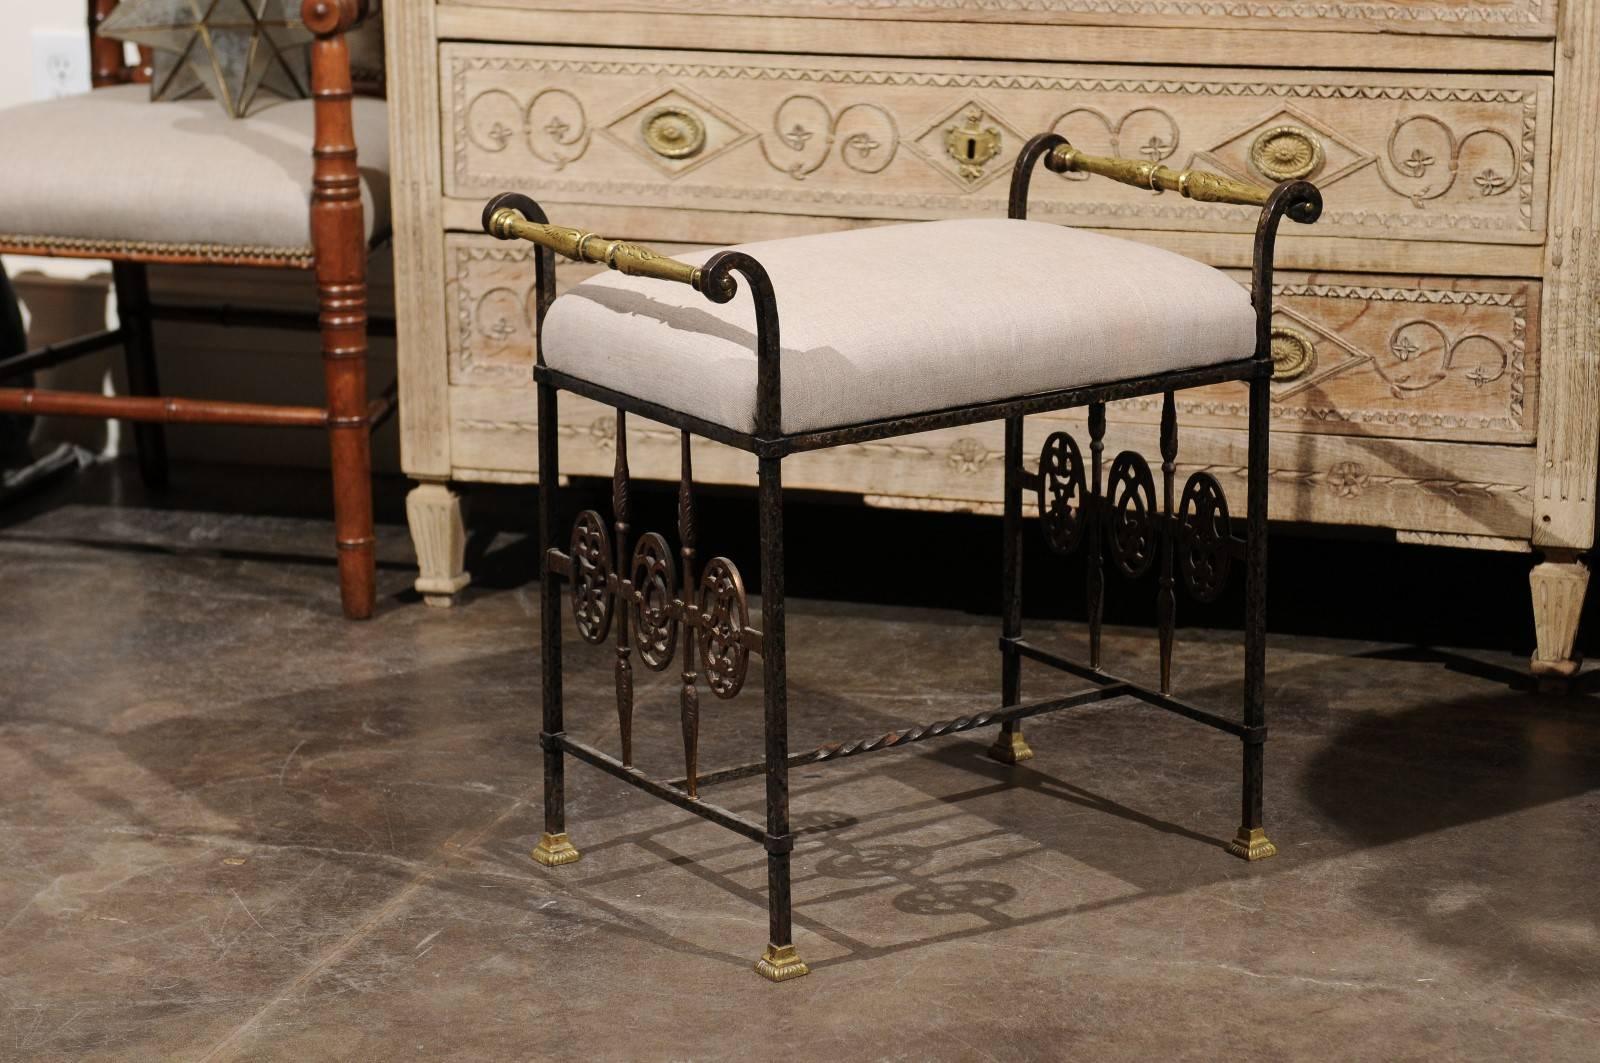 Italian wrought iron bench with bronze accents and upholstered seat from the early 20th century. This Italian 1920s bench features a wrought iron frame supporting a rectangular linen upholstered seat. The delicately out-scrolled arms are highlighted